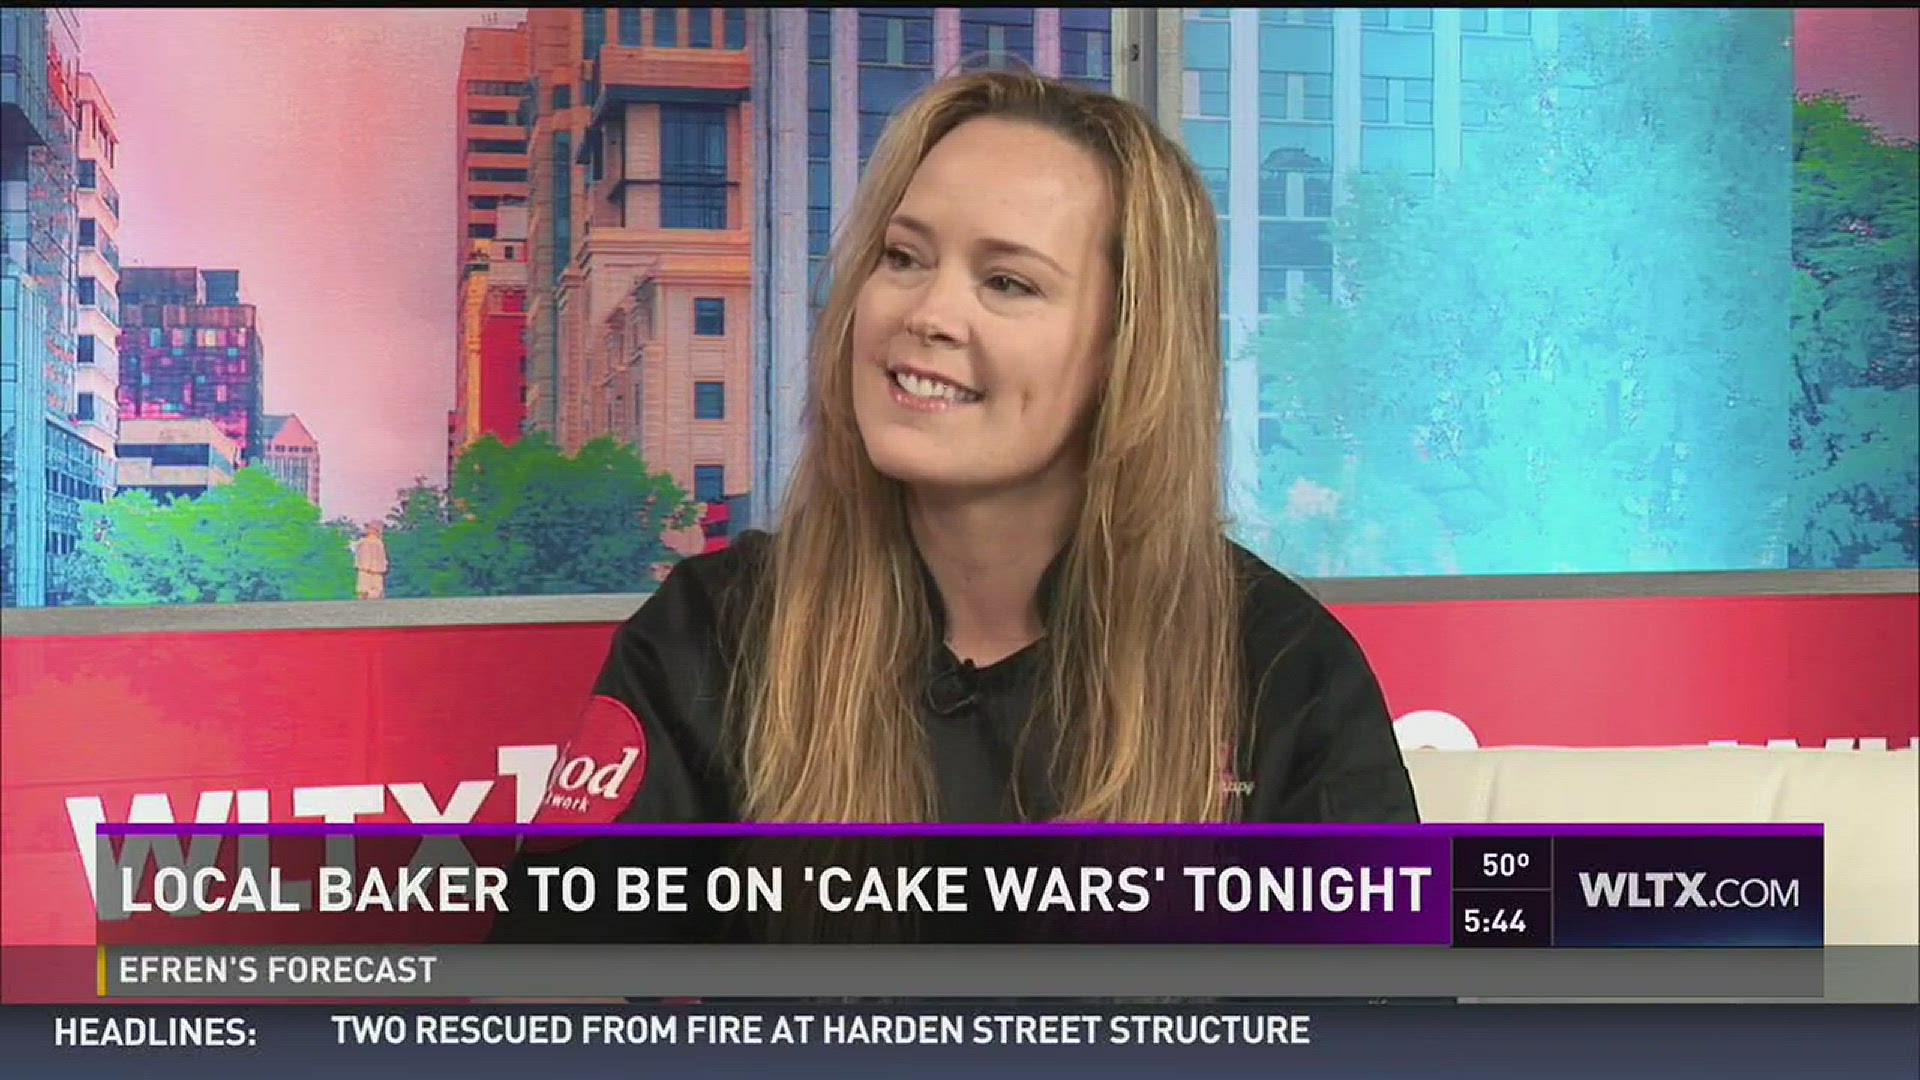 If you're a fan of the Food Network's "Cake Wars," you may notice a familiar face tonight. Carmel Turner will bring some "Sugar Therapy" to the competition. She dropped by our studios to discuss (what she could) about the experience.